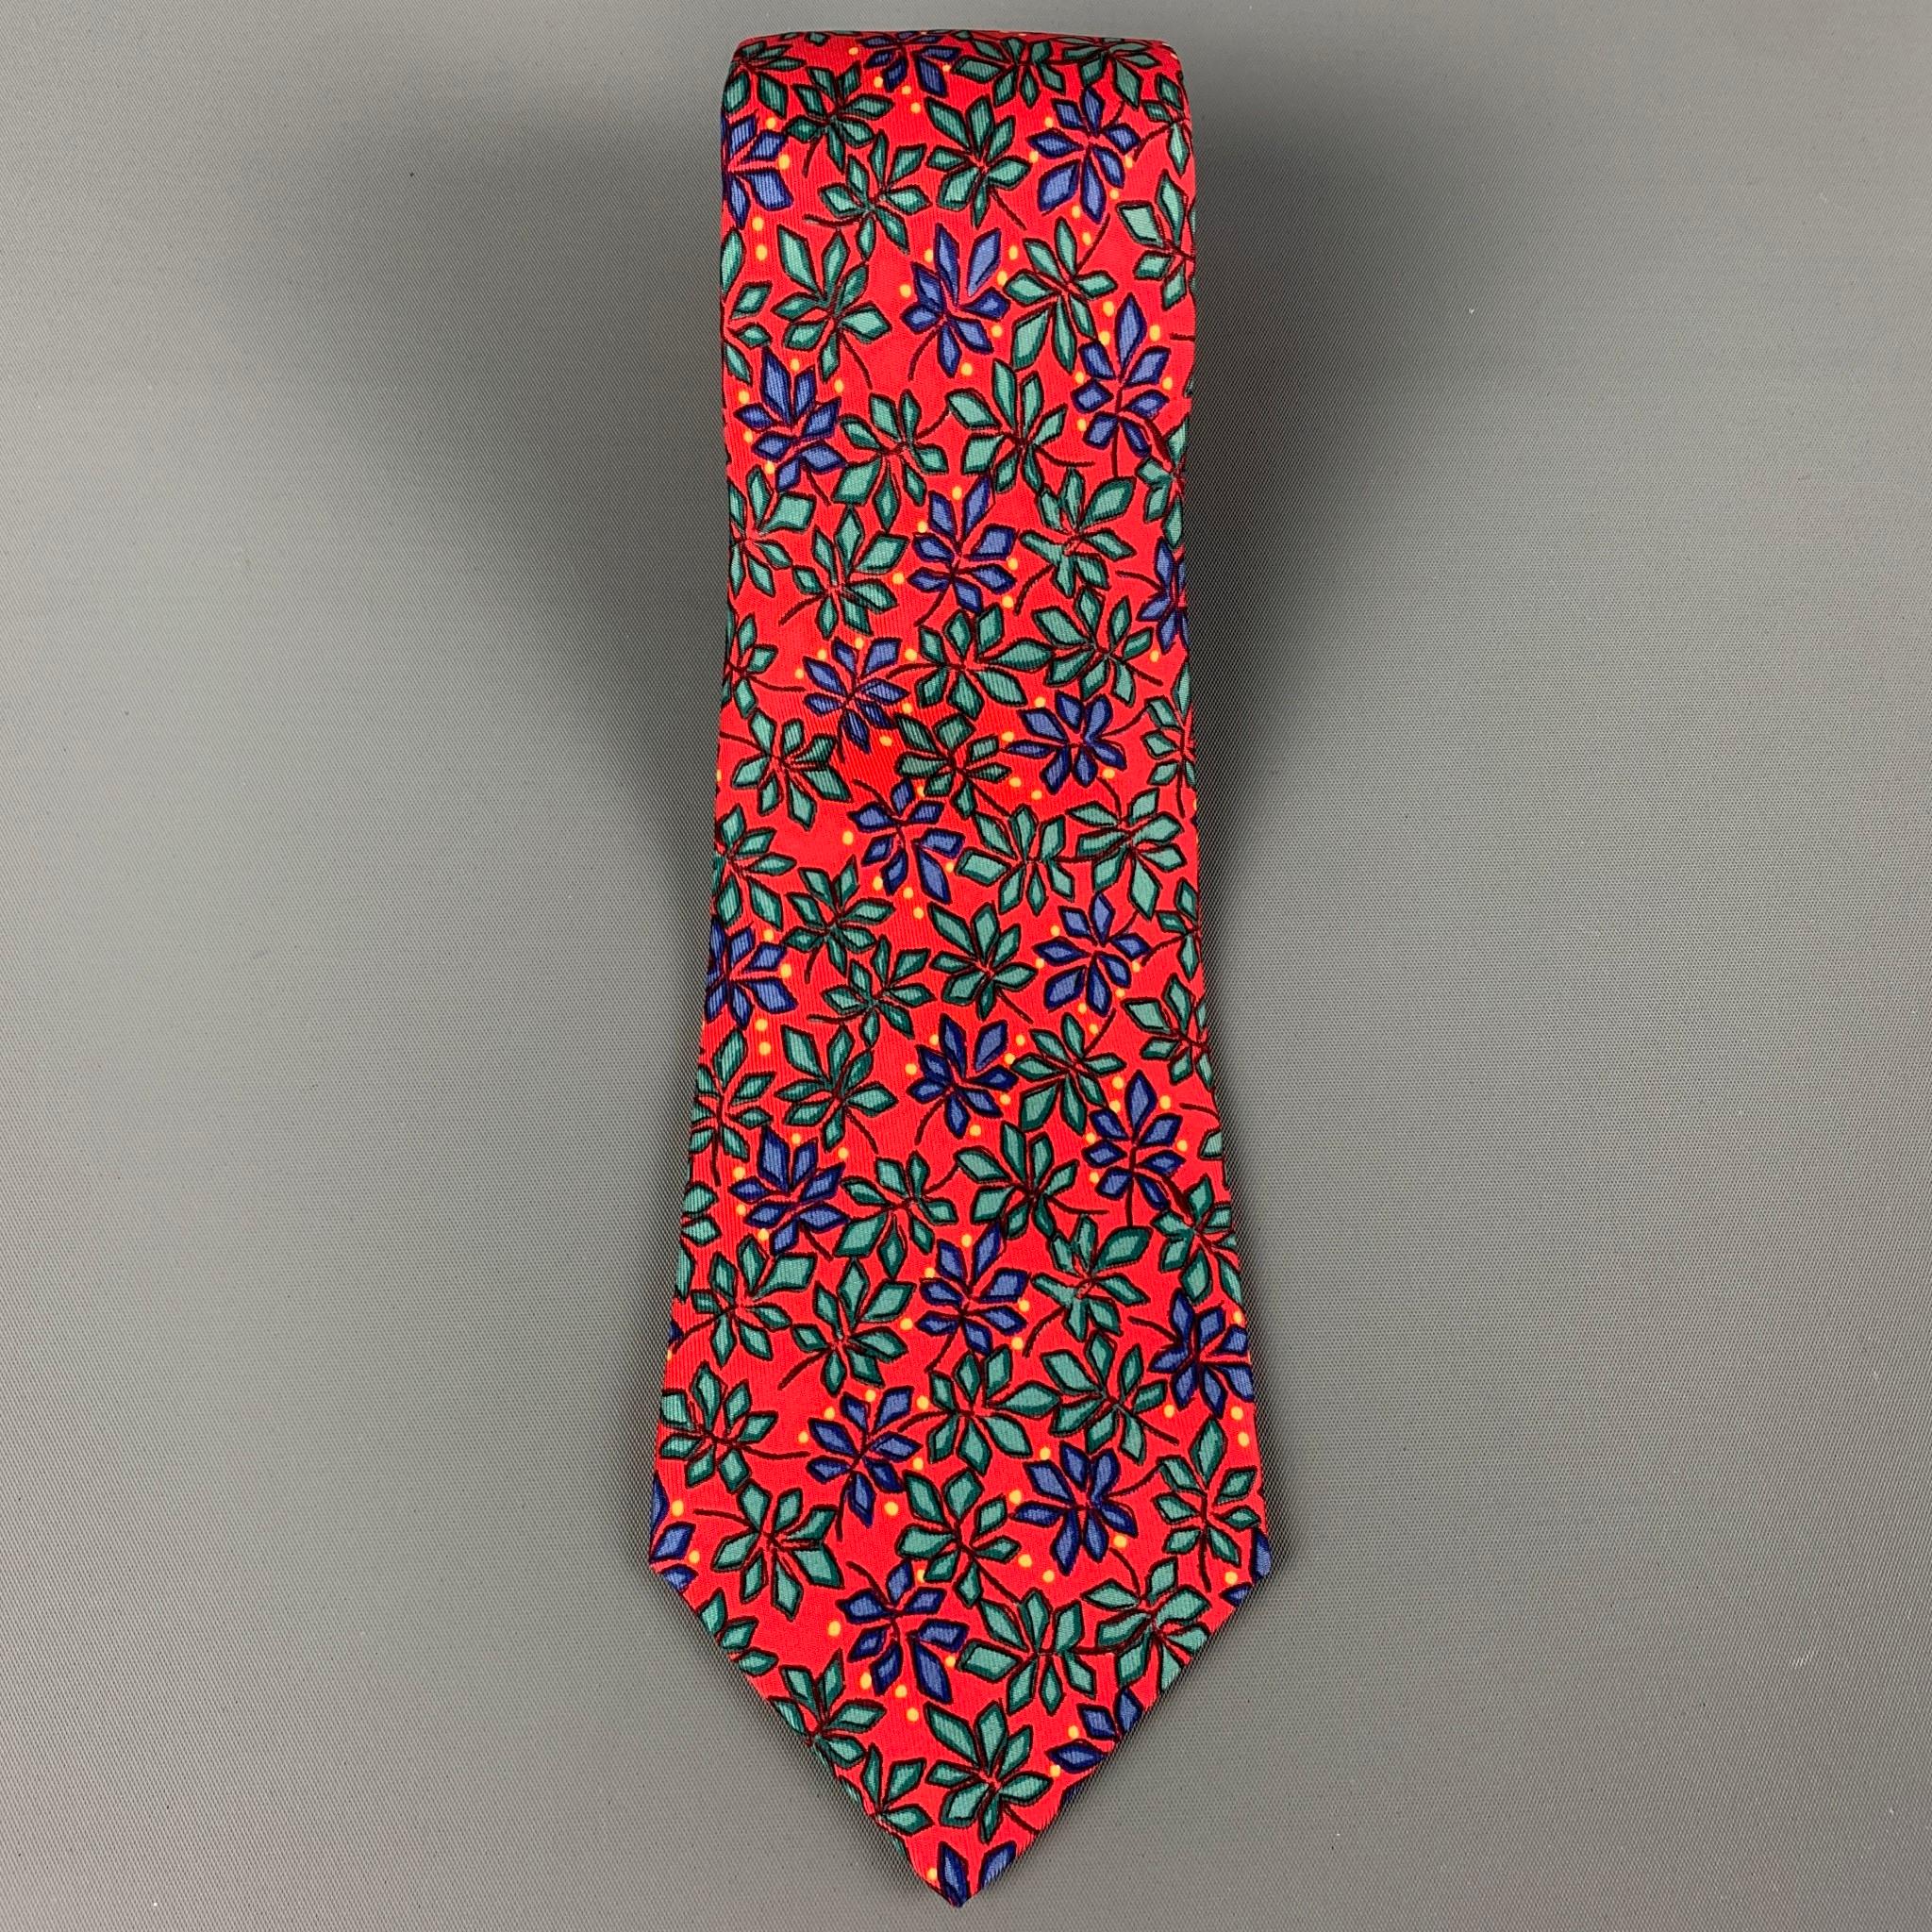 HERMES necktie comes in a red & multi-color silk with a all over poinsettias print. Made in France.

Excellent Pre-Owned Condition.
Maked: 7365 PA

Measurements:

Width: 3.5 in. / 8.8 cm.
Length: 59.5 in. / 151.1 cm.

